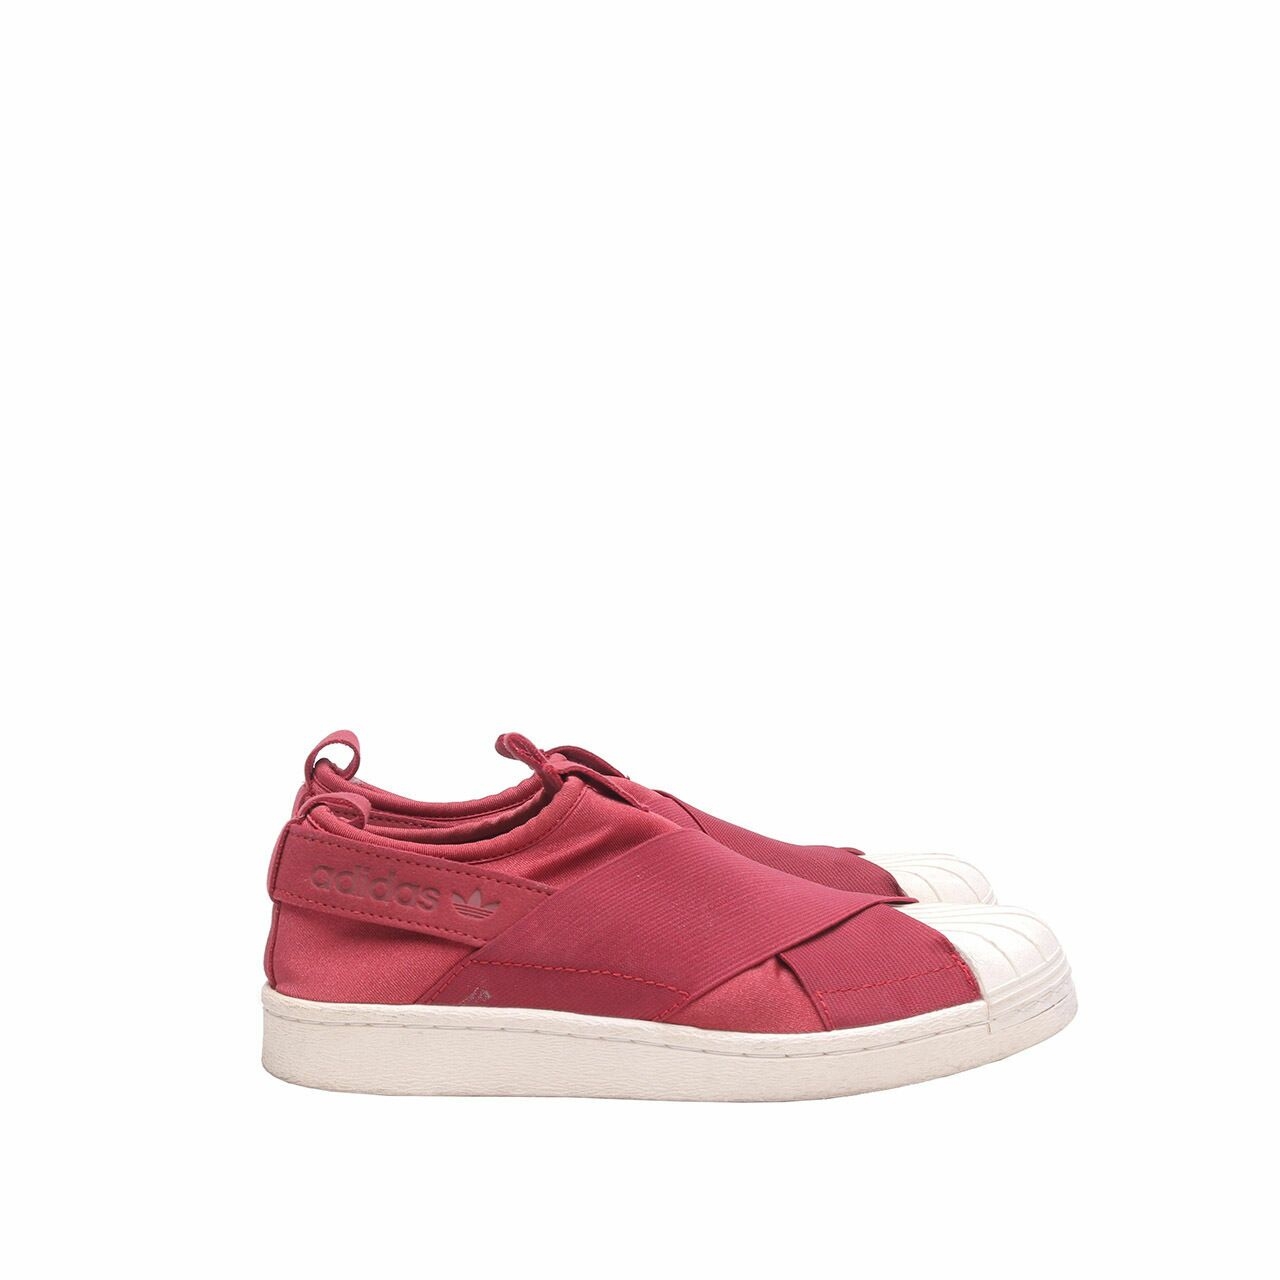 Adidas Red Slip On Sneakers